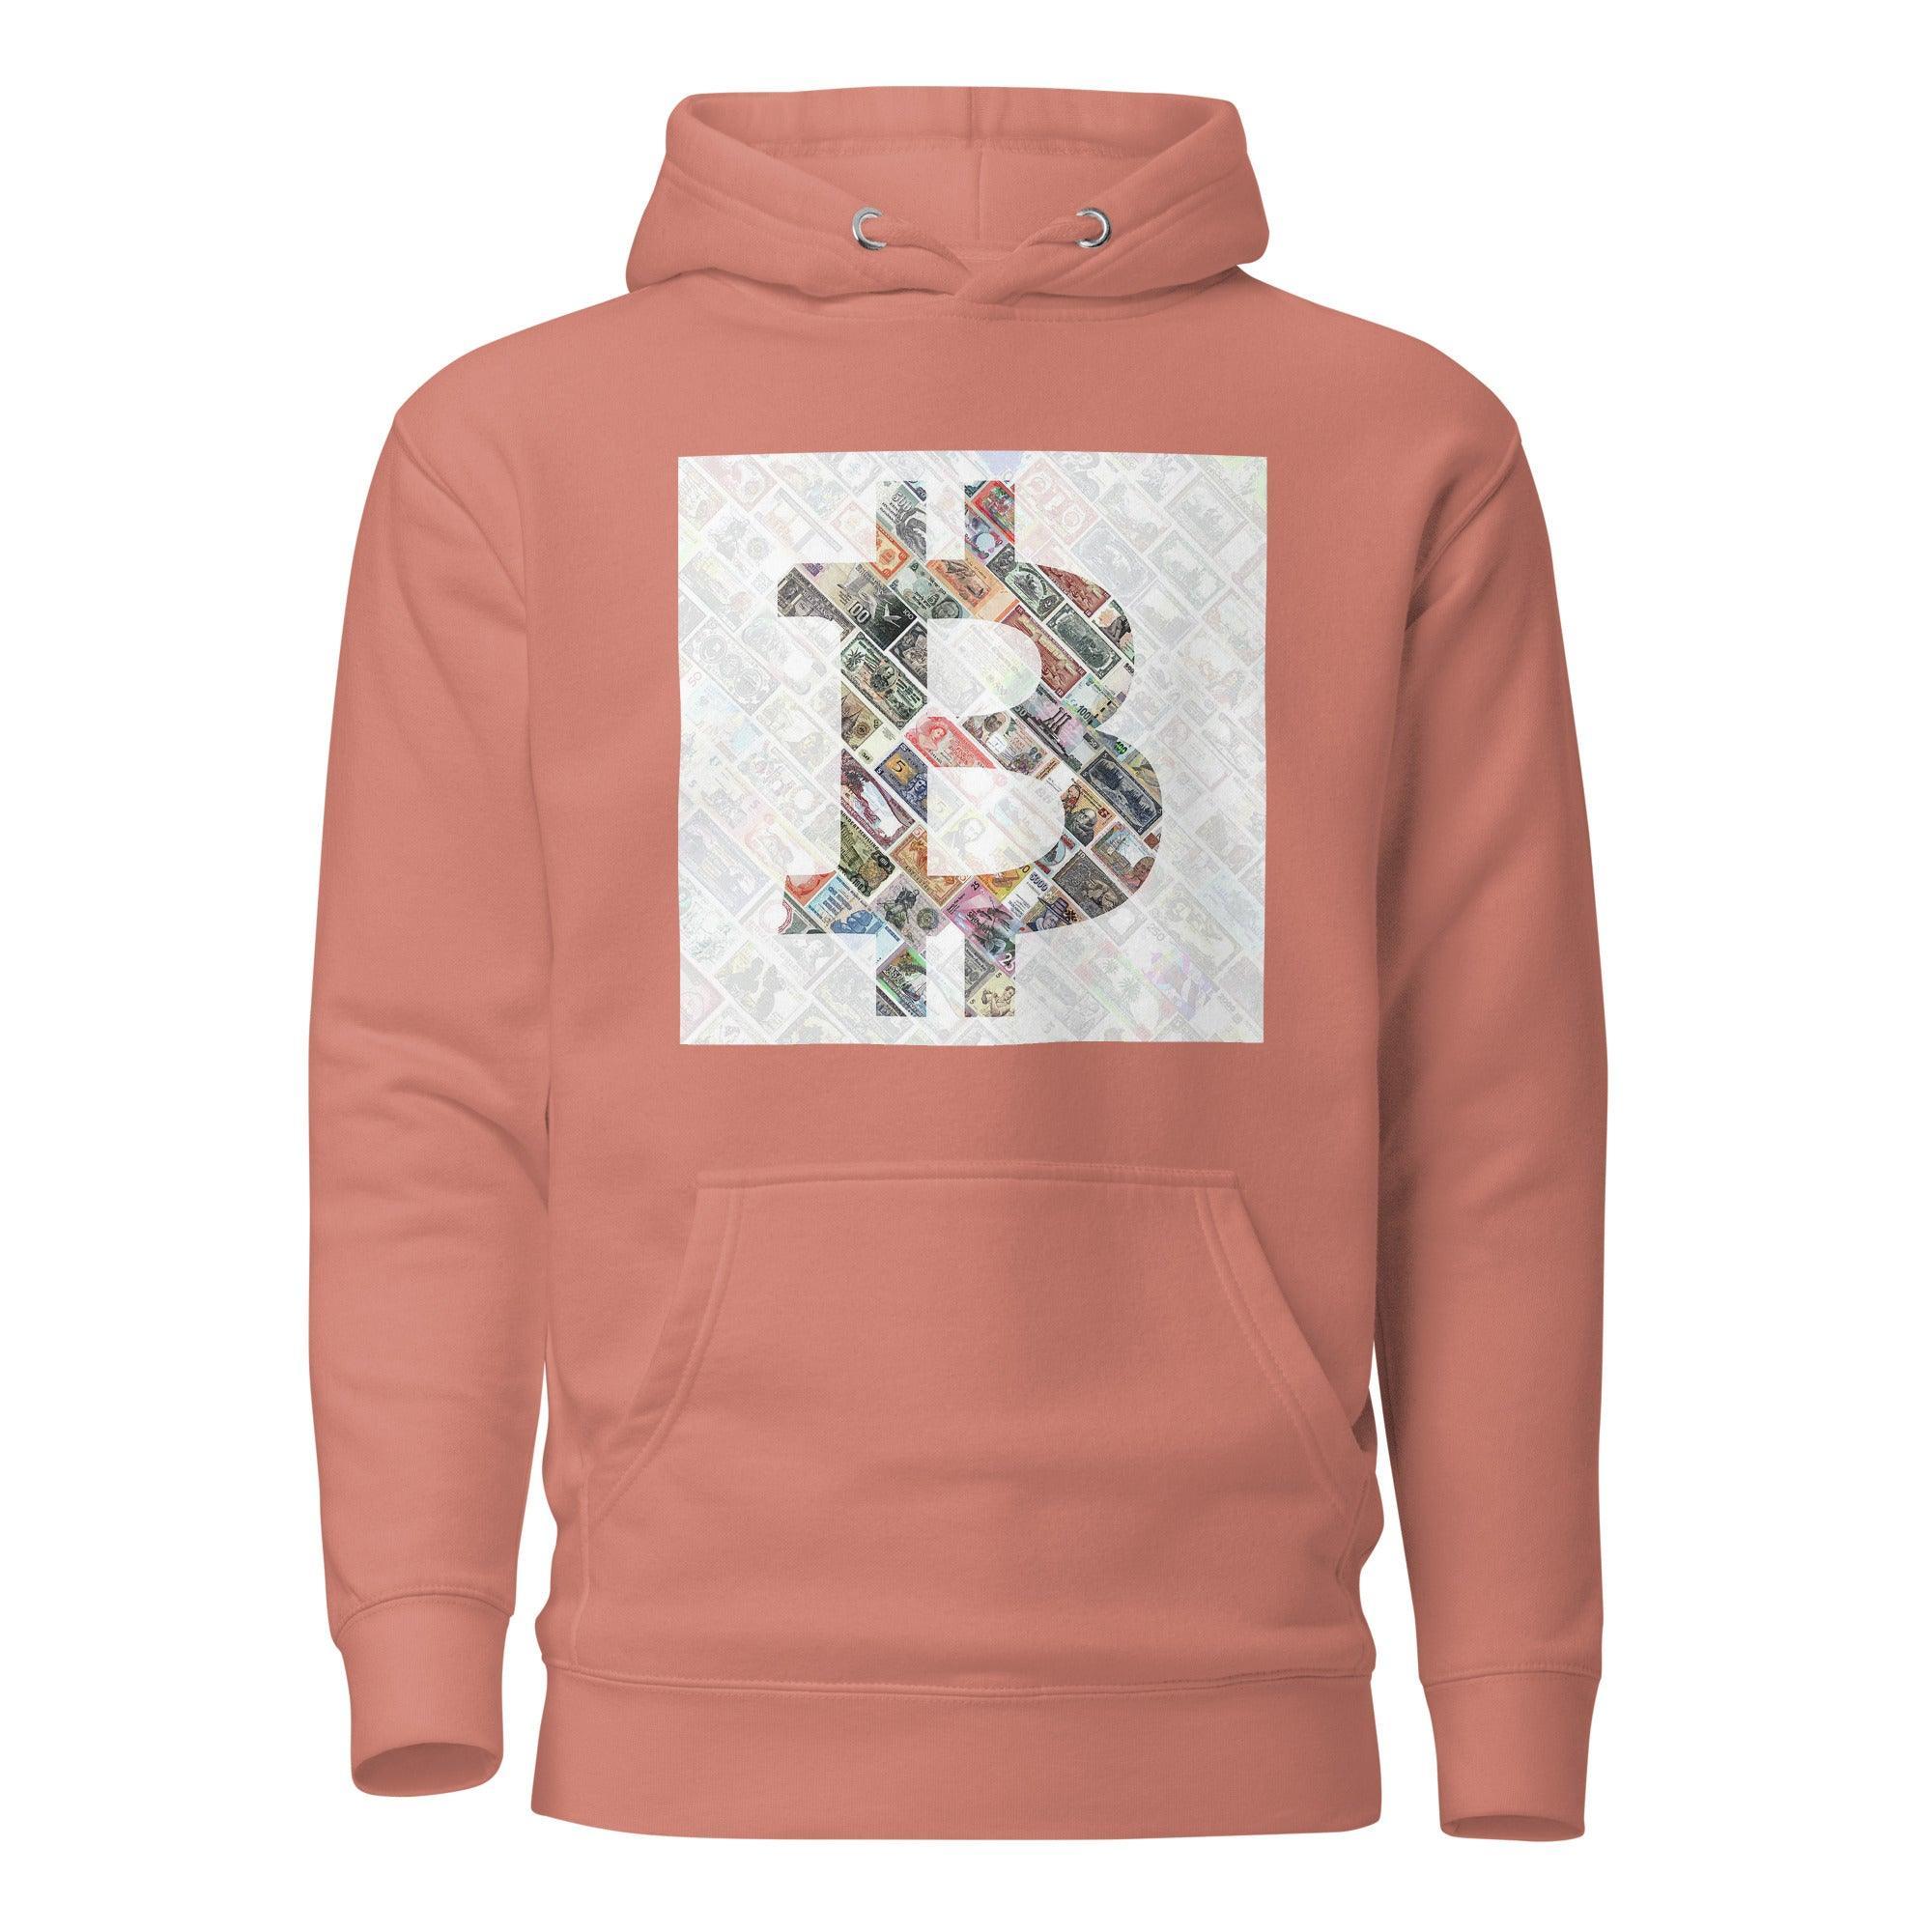 Bitcoin Mosiac Pullover Hoodie - InvestmenTees